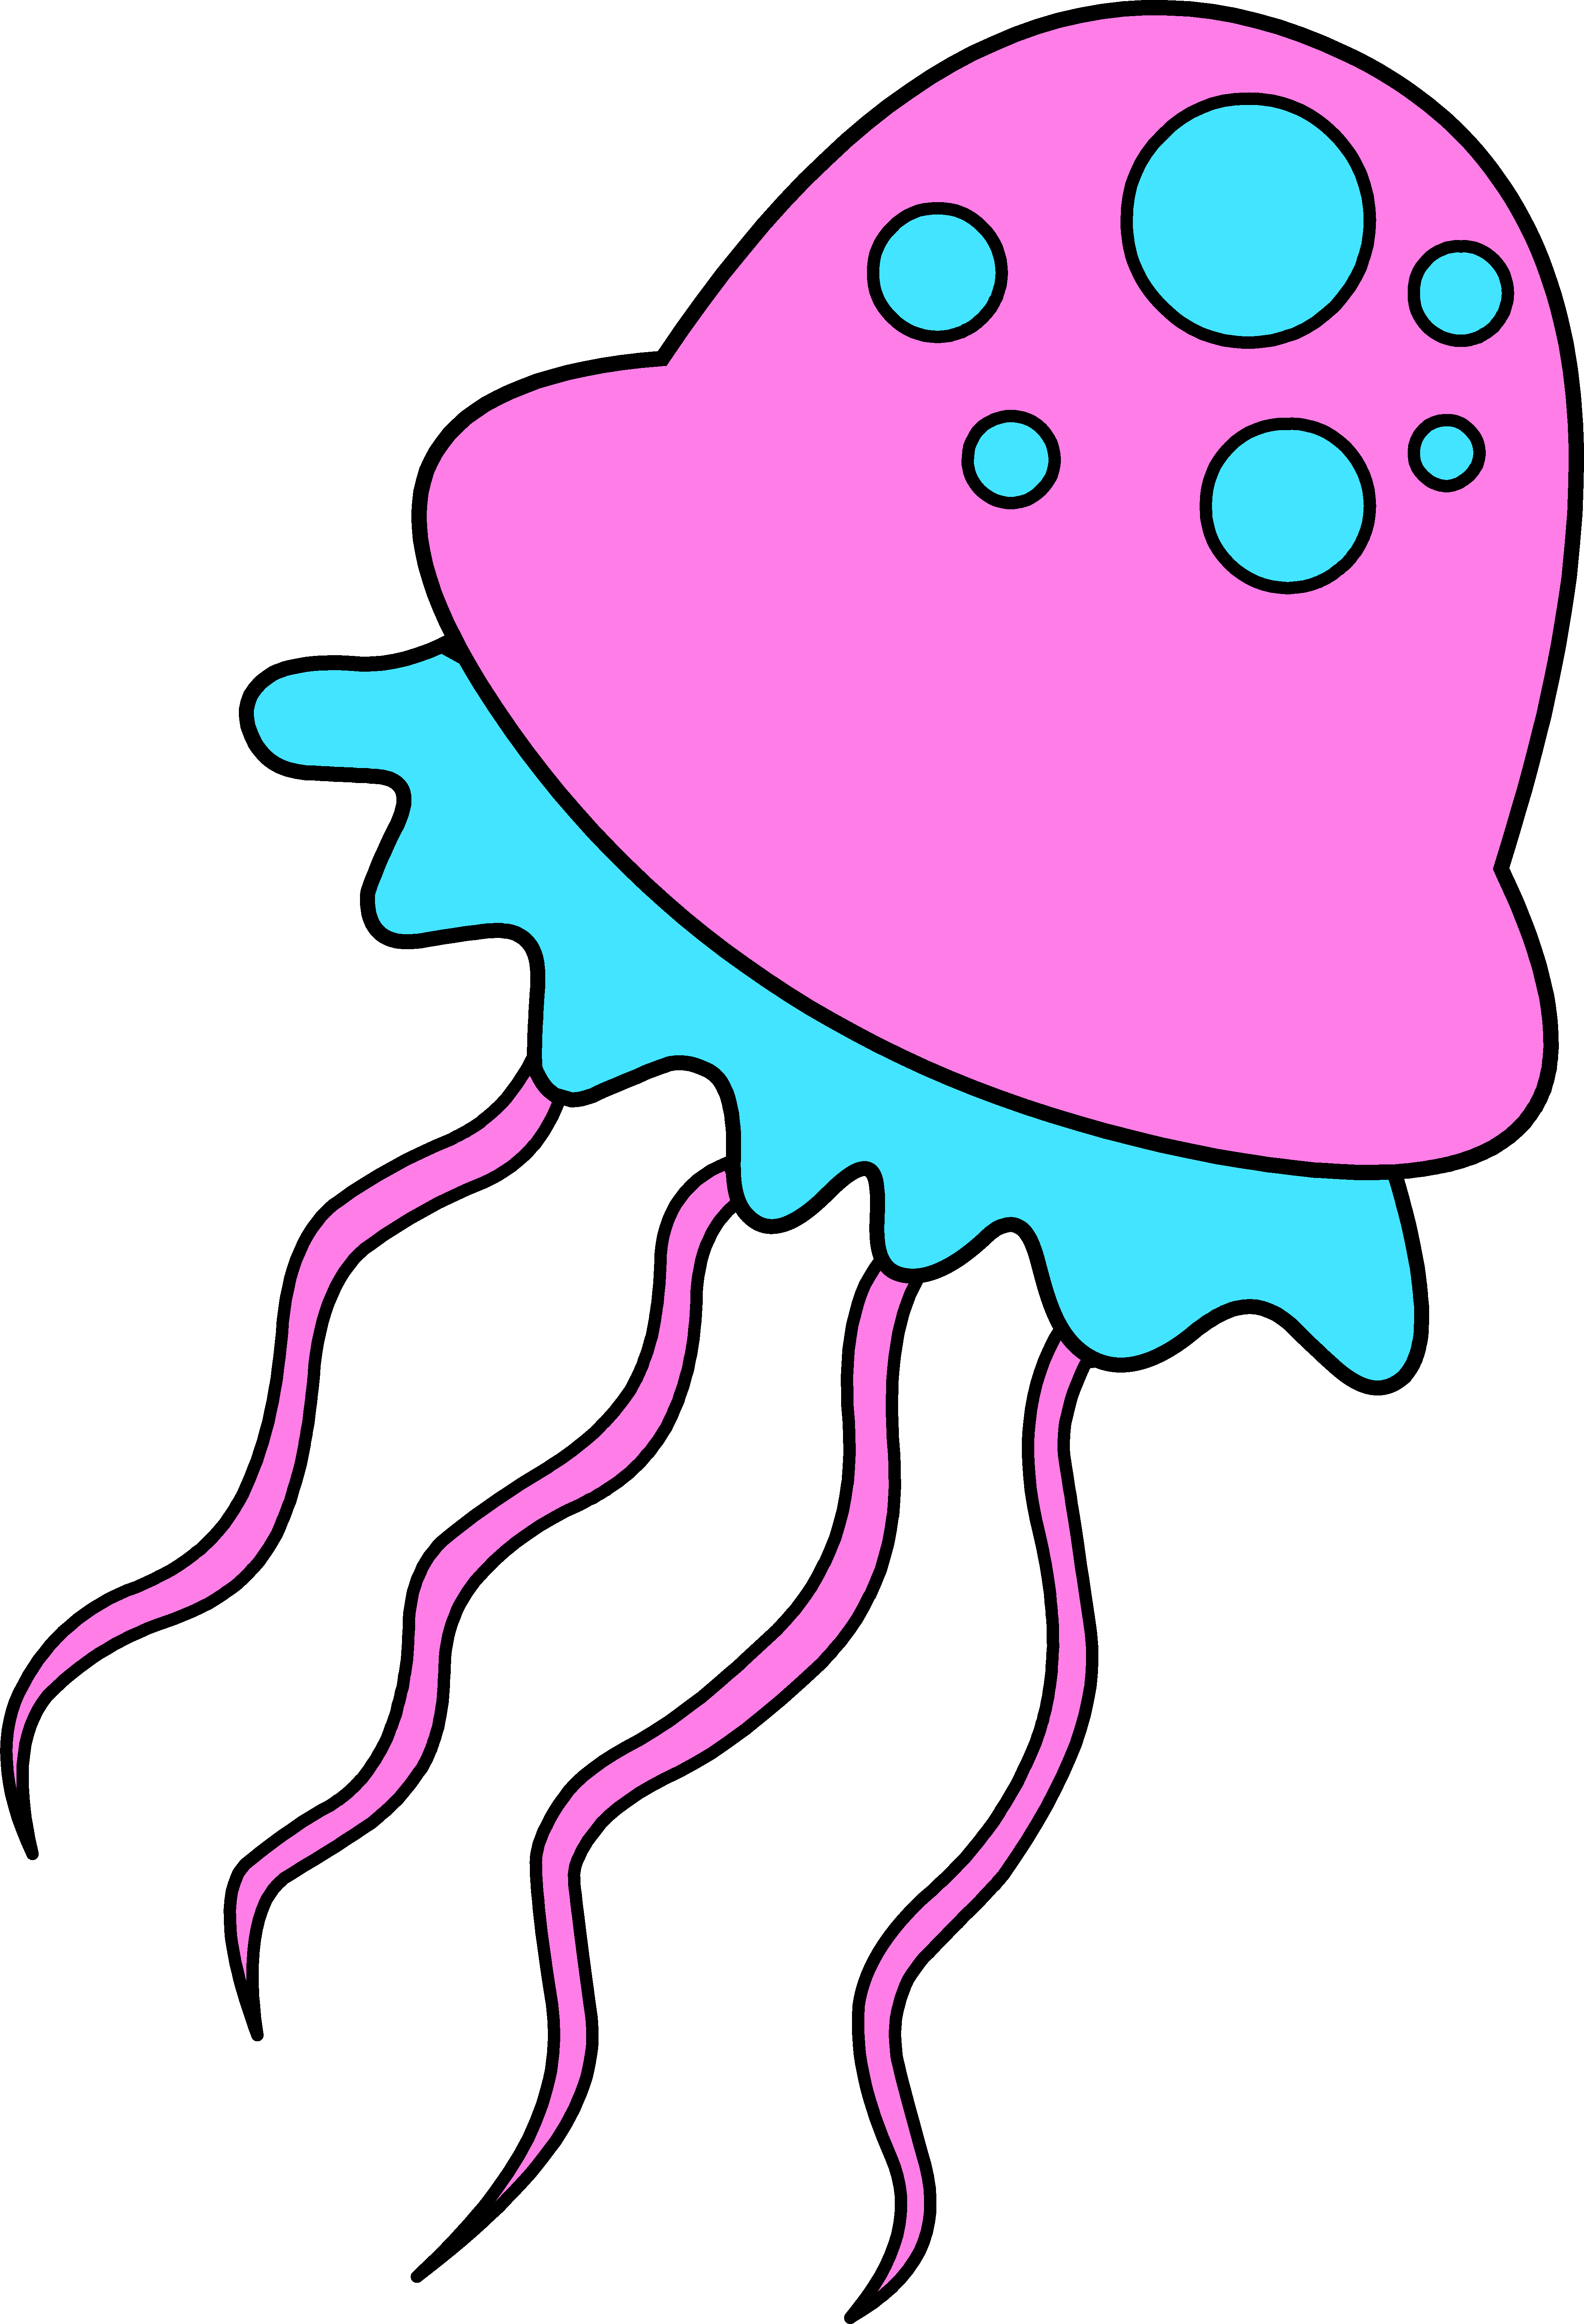 Pink and blue jellyfish. Iron clipart cute